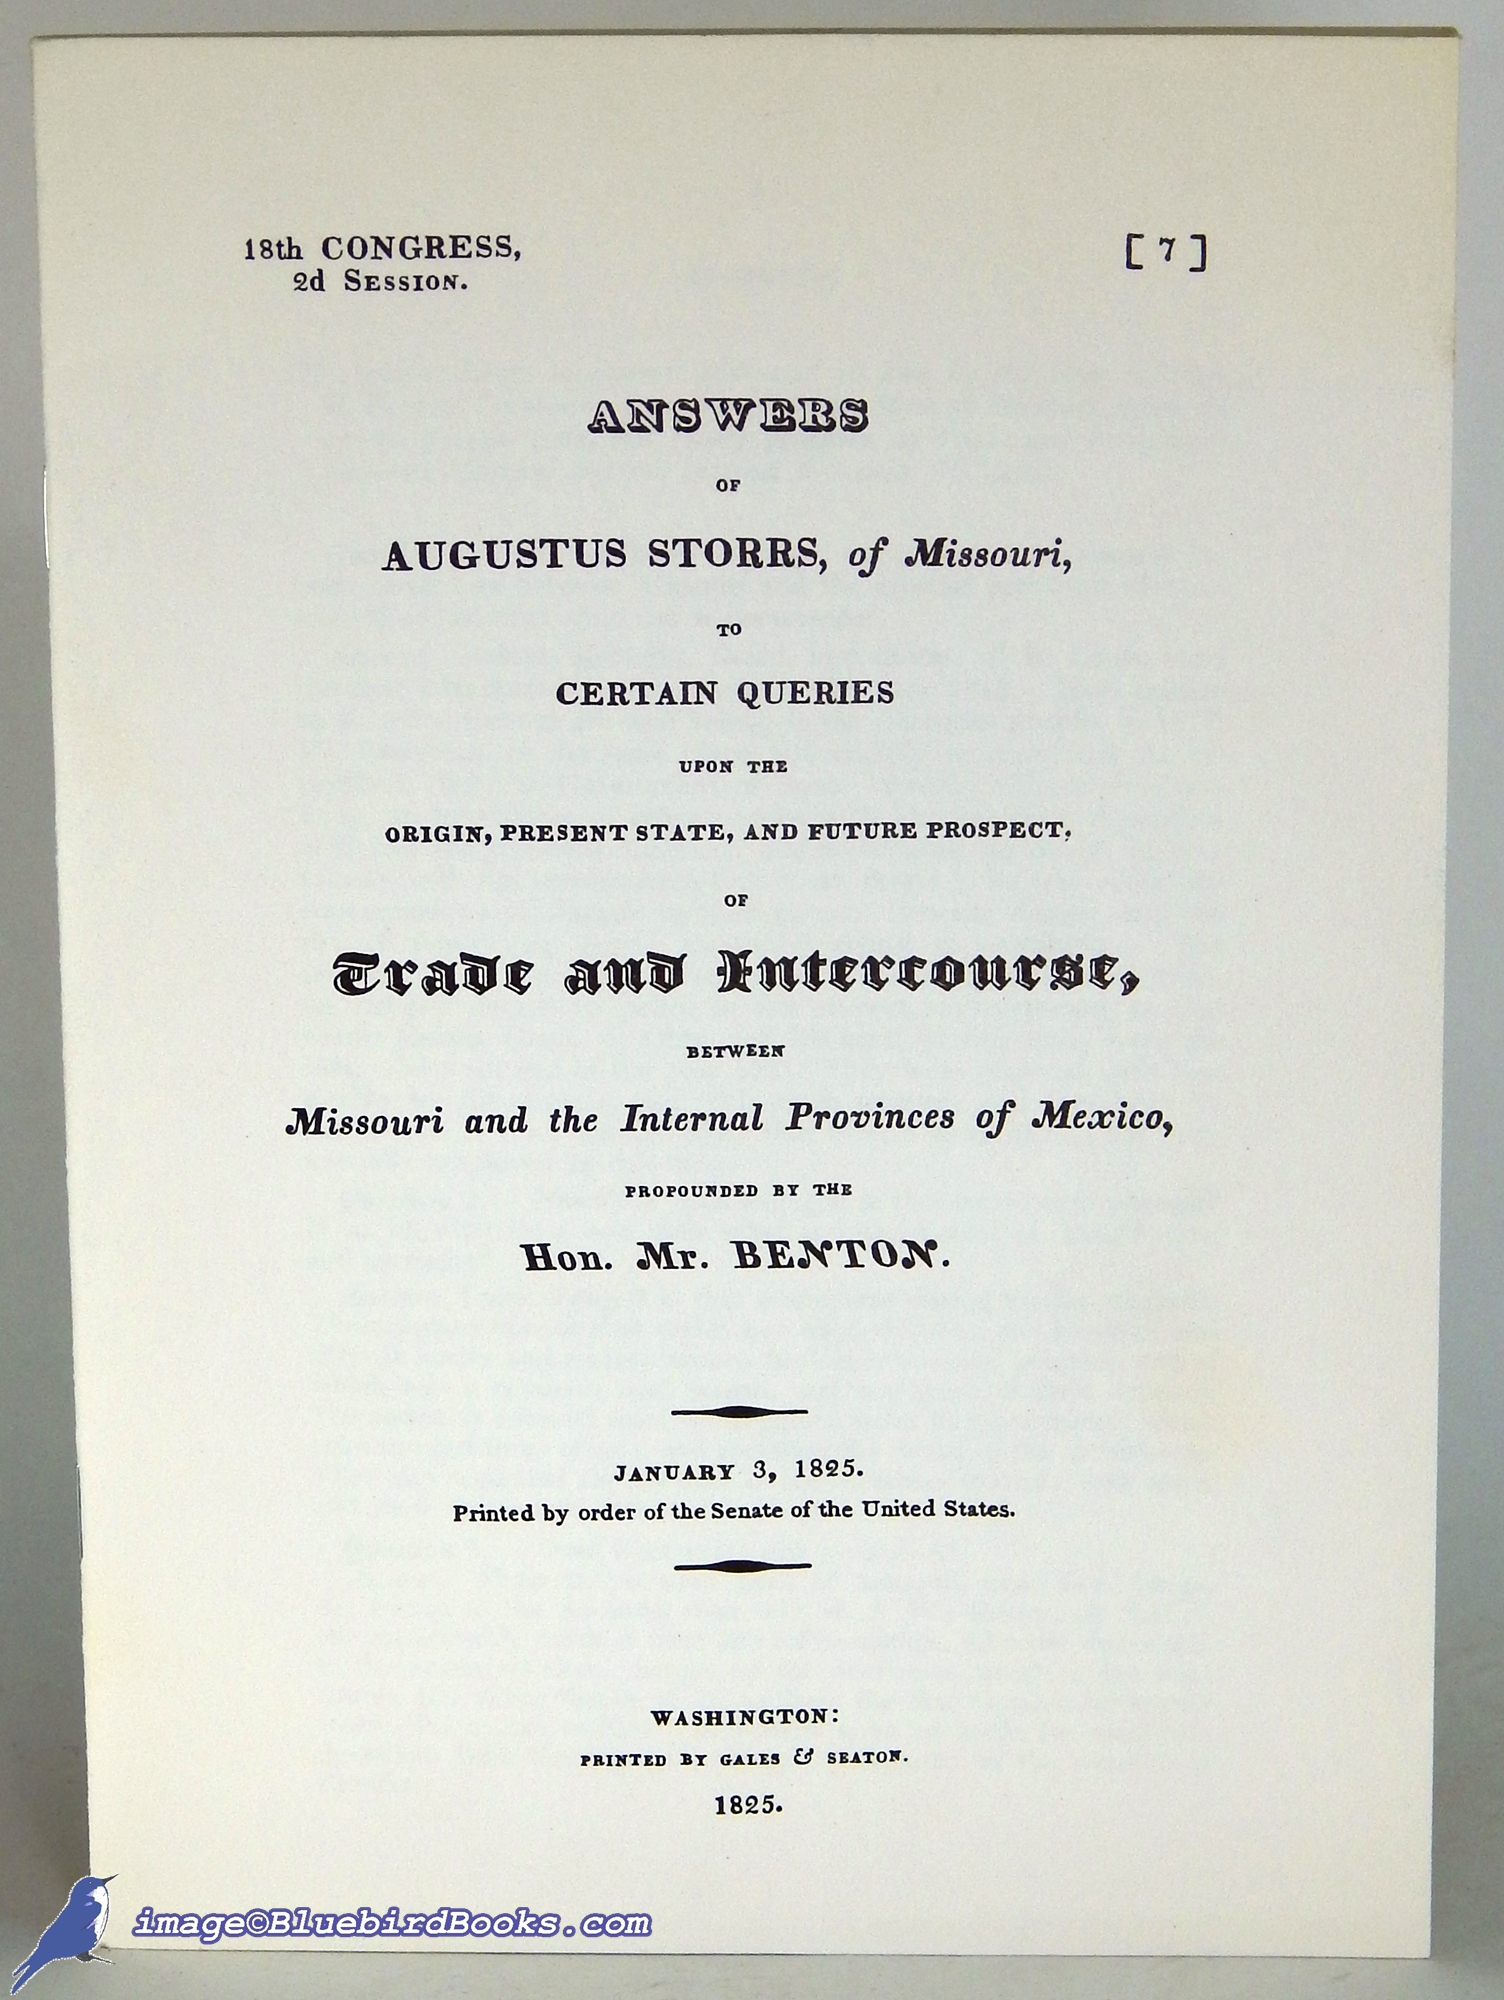 STORRS, ANGUS - Answers of Augustus Storrs, of Missouri, to Certain Queries Upon the Origin, Present State, and Future Prospect, of Trade and Intercourse, between Missouri and the Internal Provinces of Mexico, Propounded by the Hon. Mr. Benton